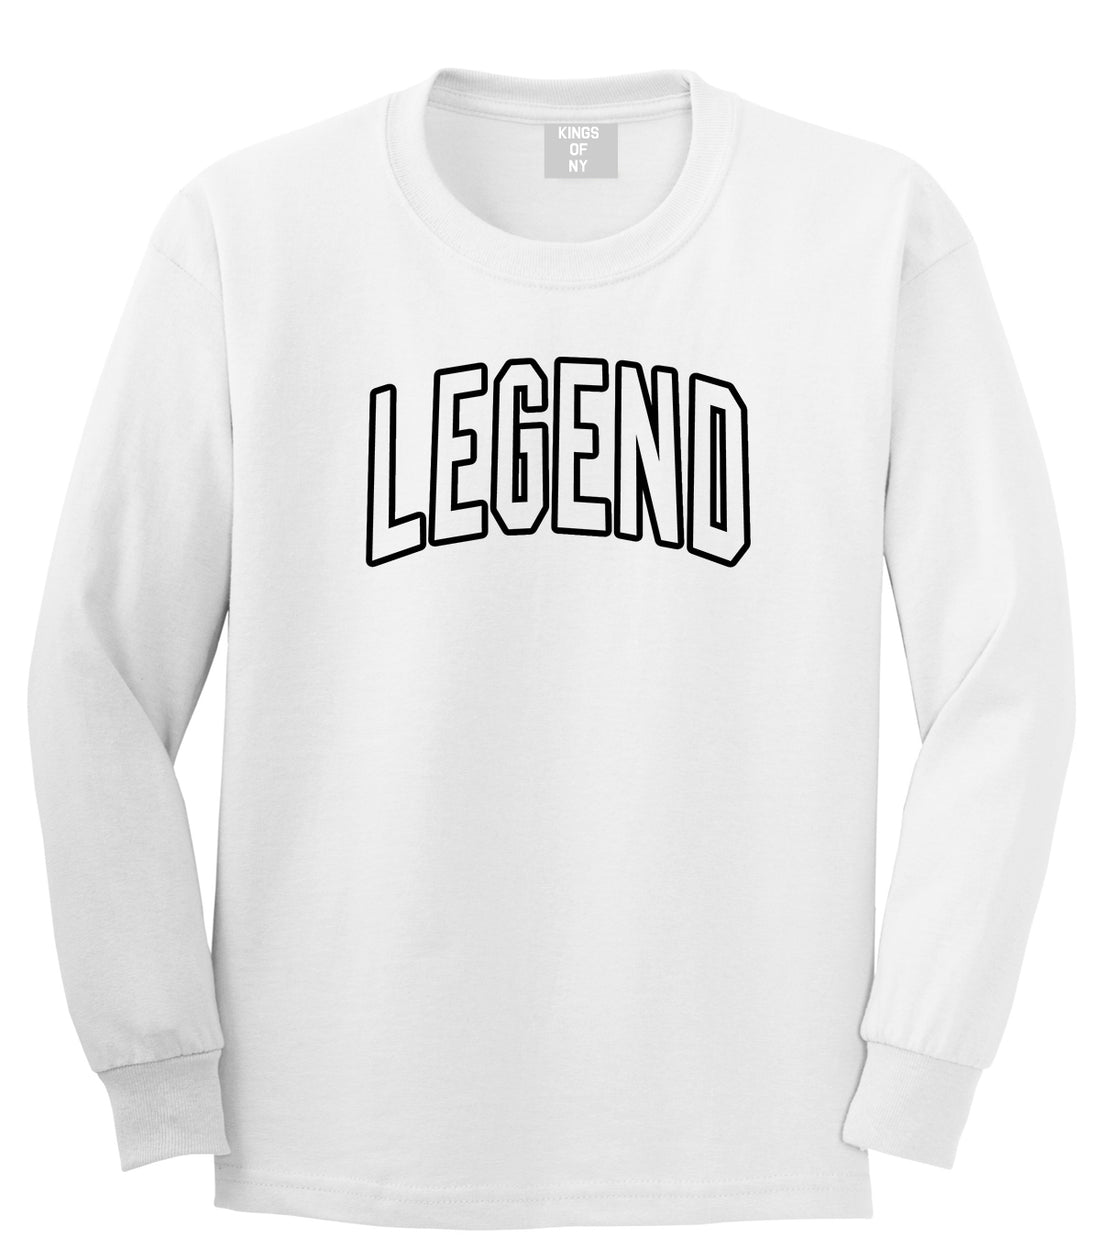 Legend Outline Mens Long Sleeve T-Shirt White by Kings Of NY